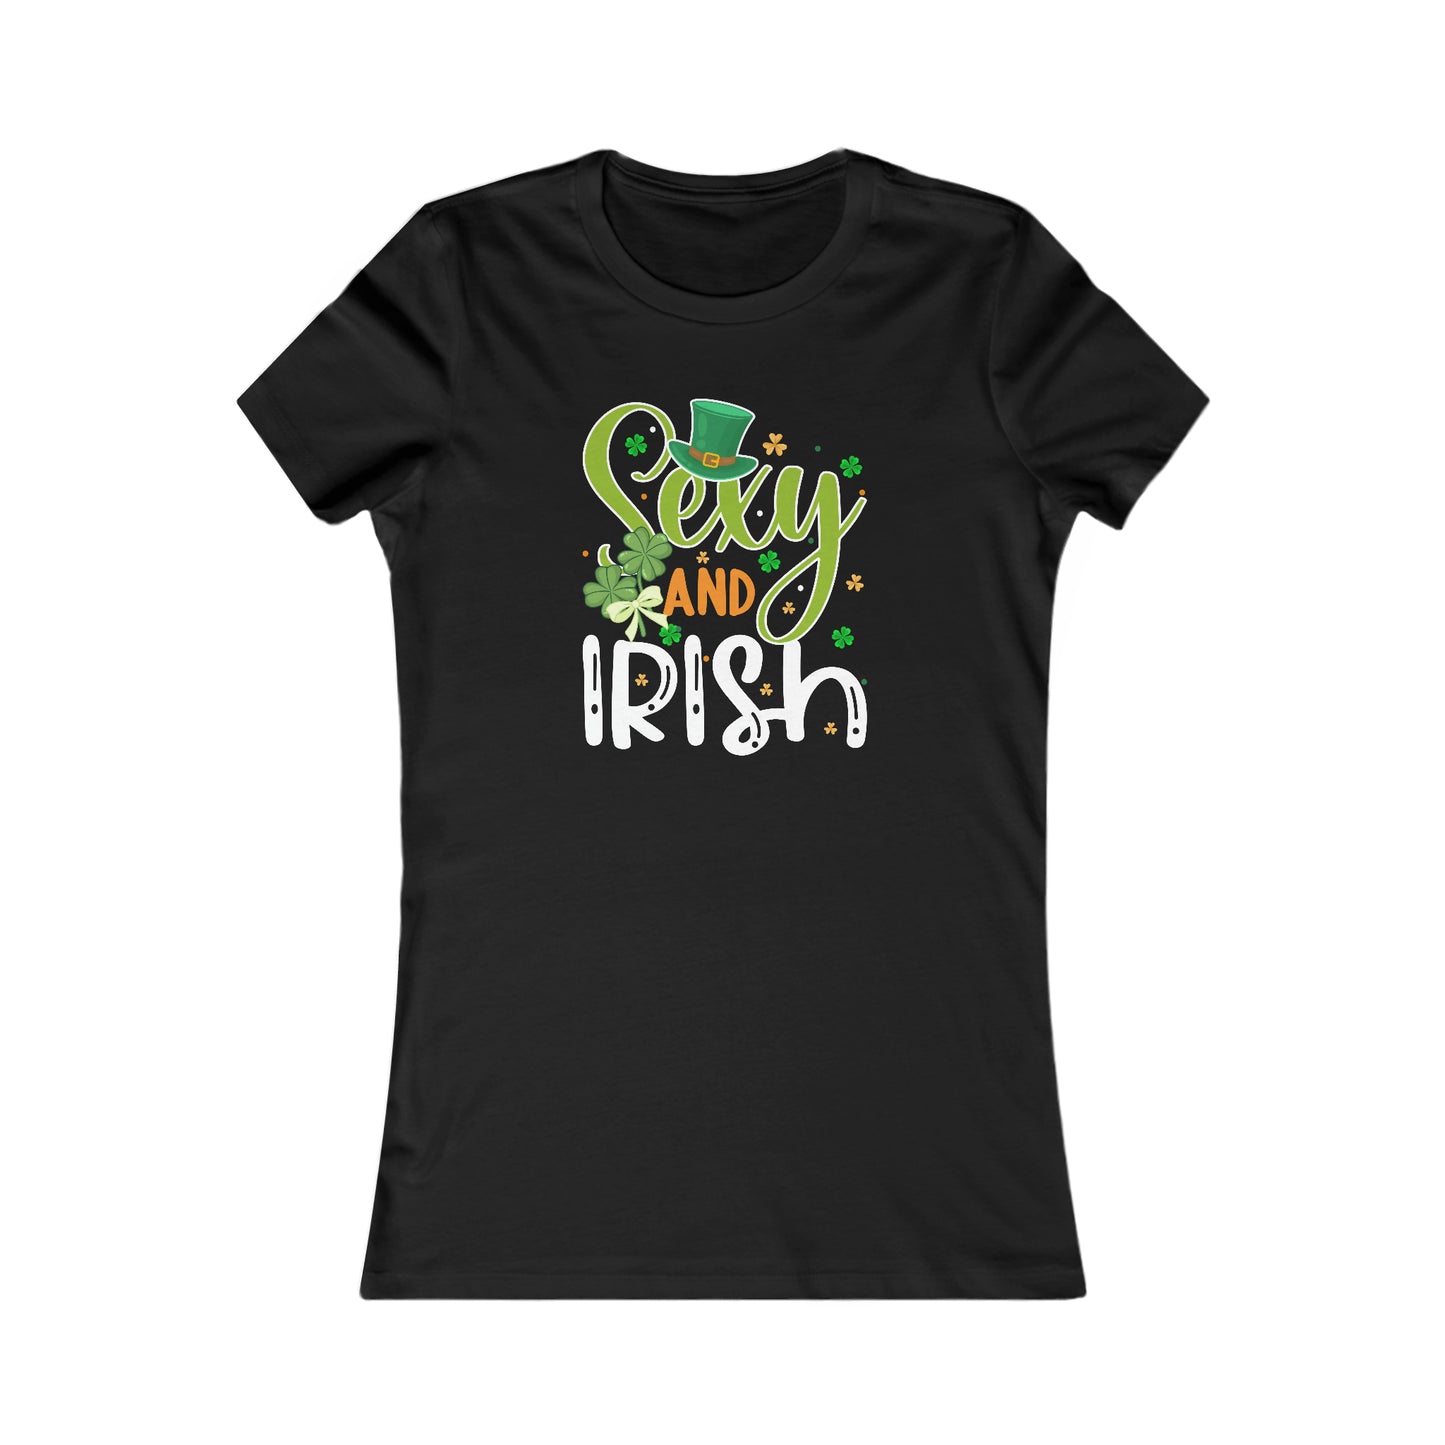 Sexy Irish T-Shirt For St. Paddy's Day TShirt For Irish Holiday T Shirt For Her